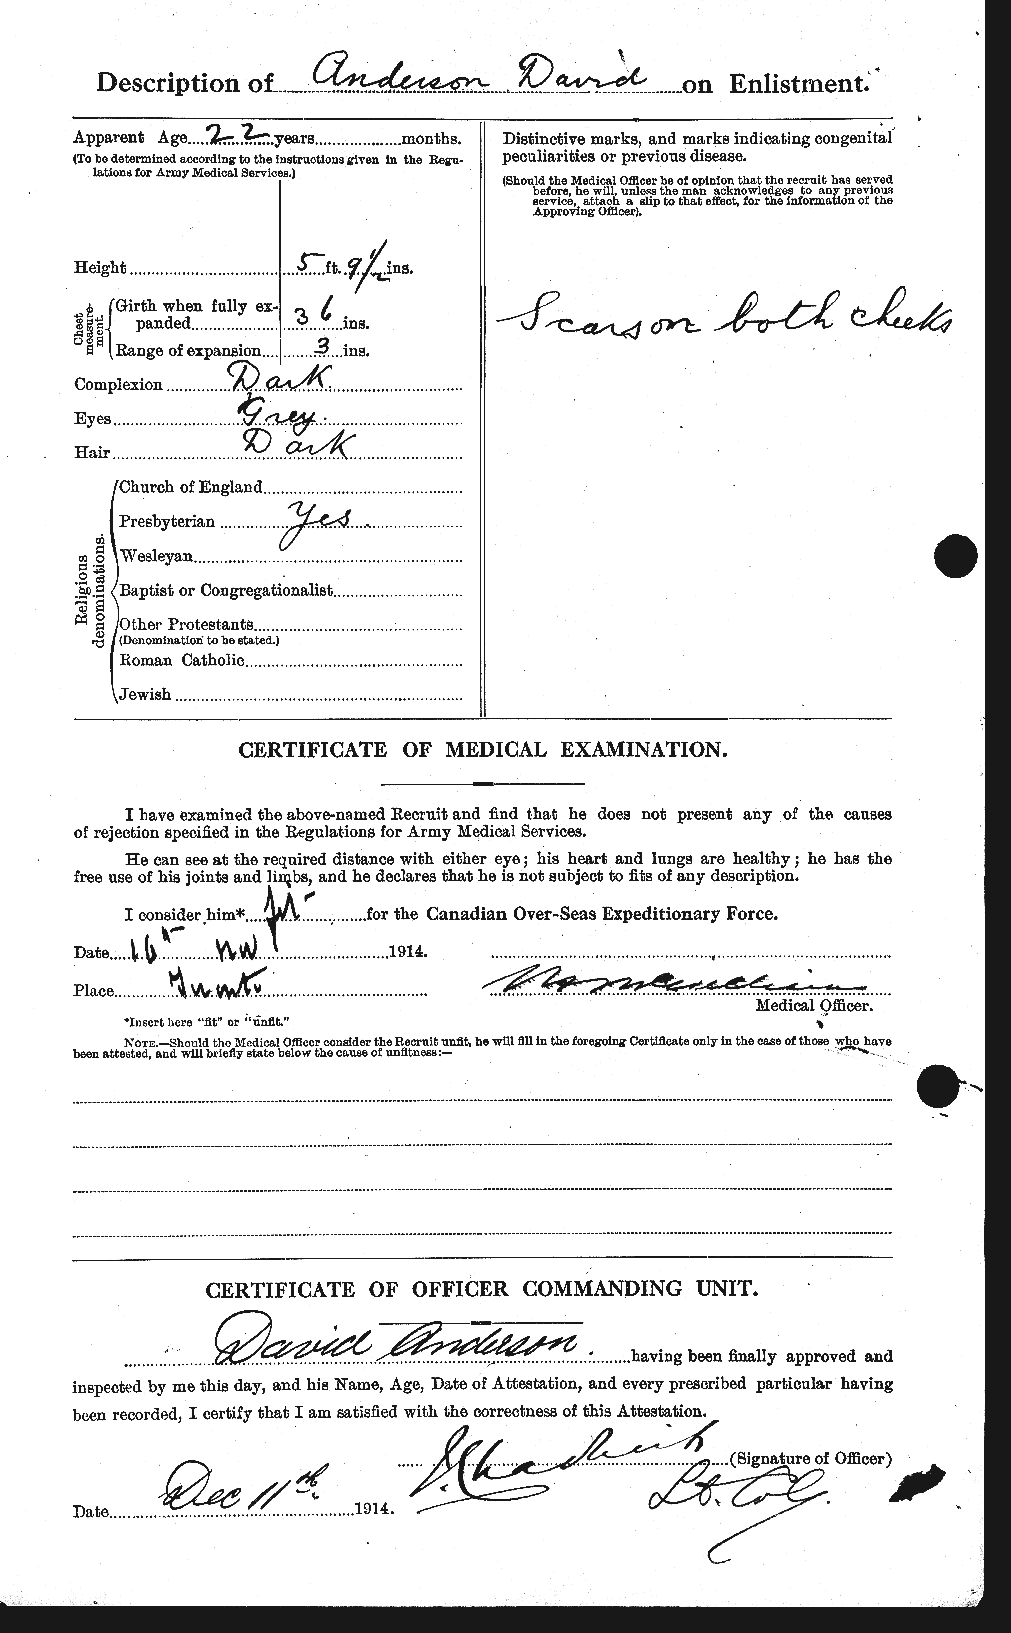 Personnel Records of the First World War - CEF 210031b